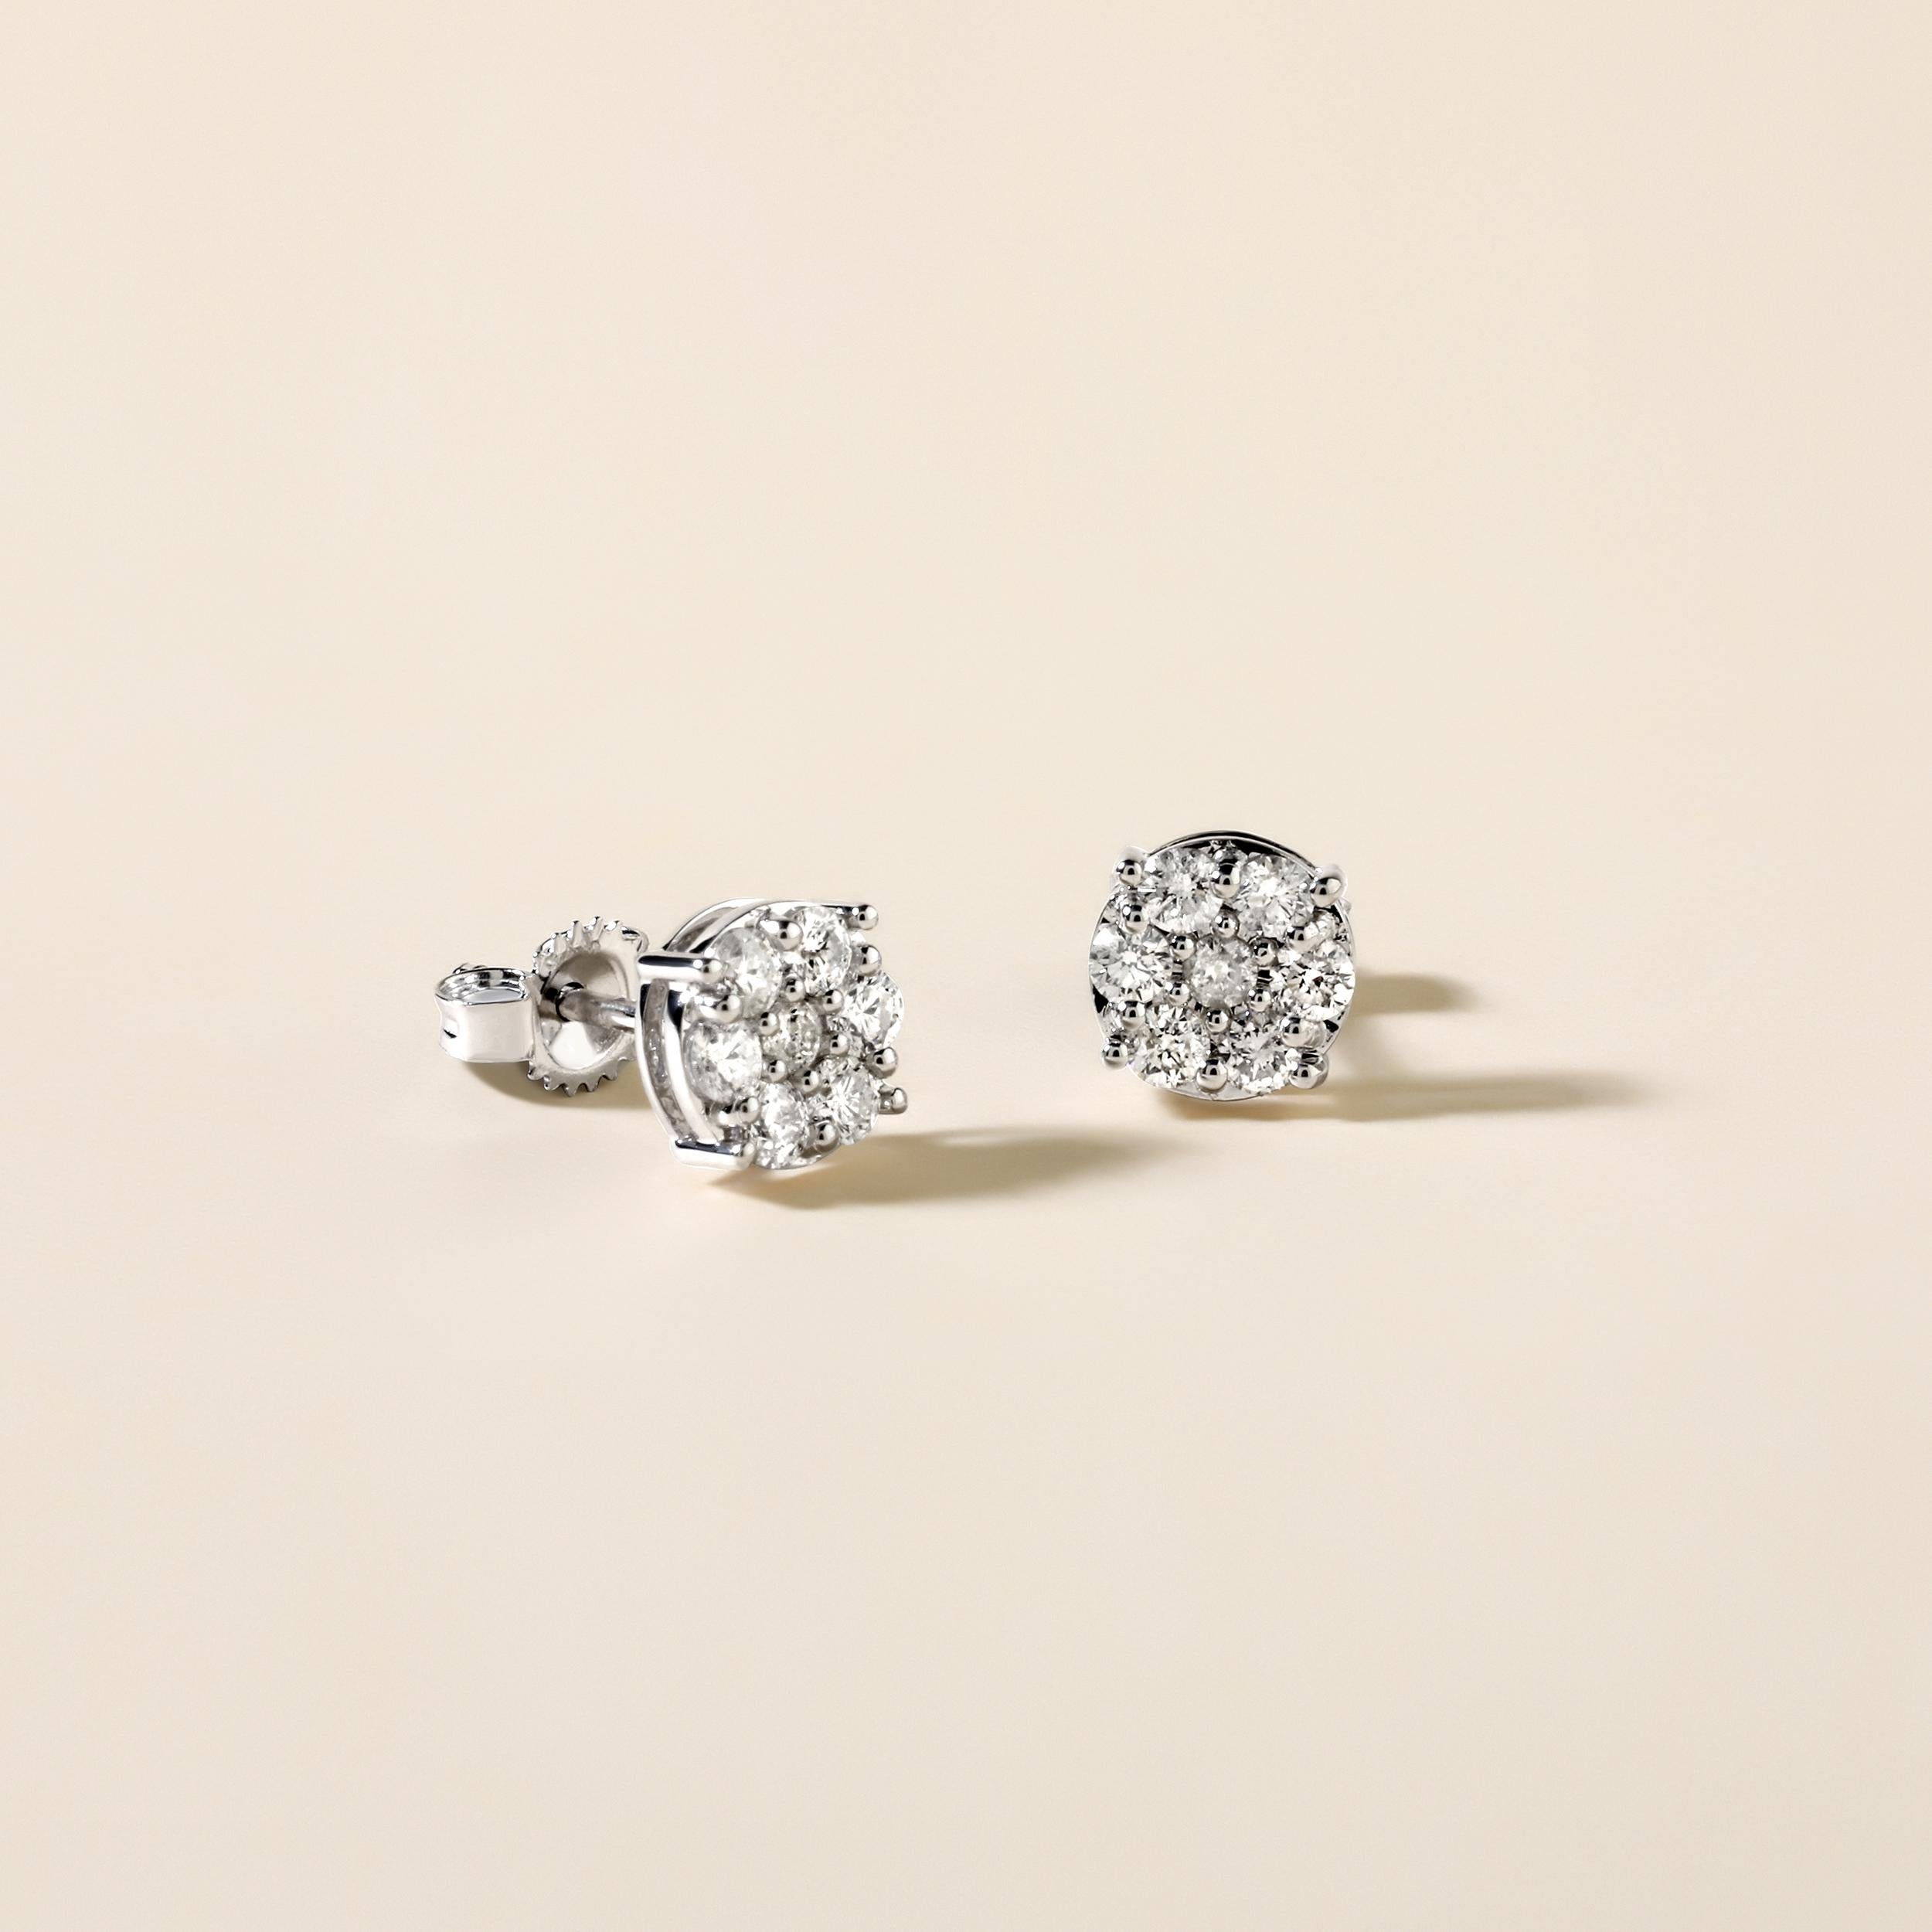 Crafted in 1.26 grams of 14K White Gold, the earrings contains 14 stones of Round Diamonds with a total of 0.52 carat in F-G color and I1-I2 clarity.

CONTEMPORARY AND TIMELESS ESSENCE: Crafted in 14-karat/18-karat with 100% natural diamond and